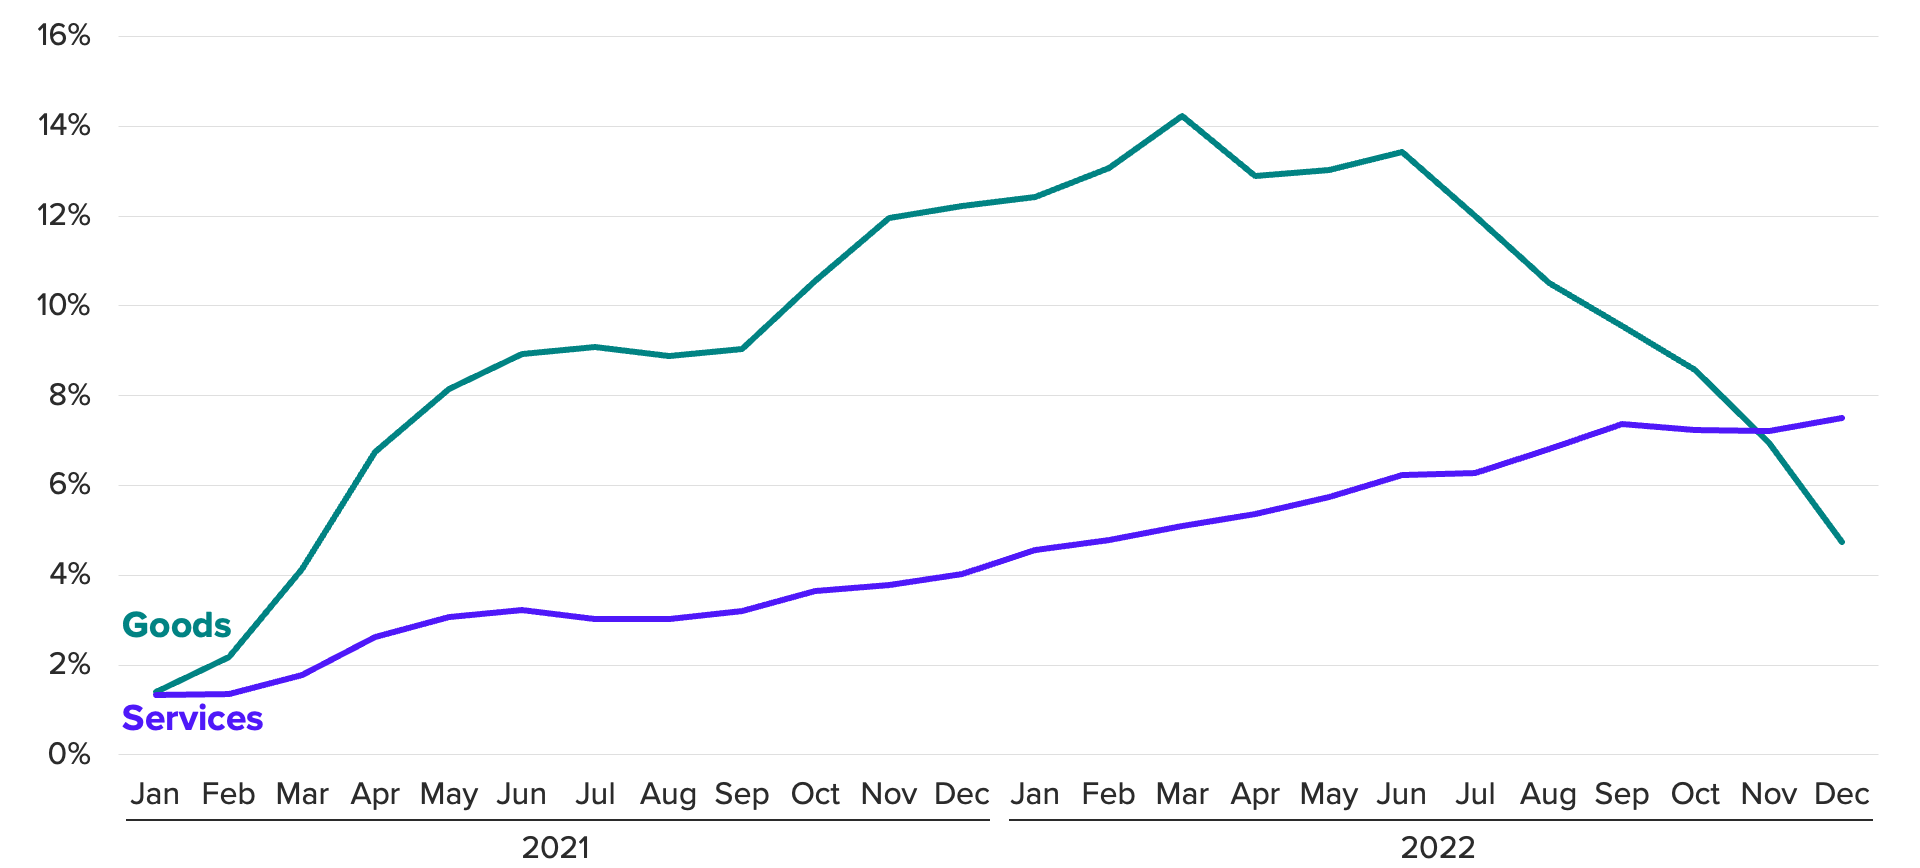 Line chart of annual price growth, showing it peaked in March 2022 before trending steadily downward over the second half of the year.